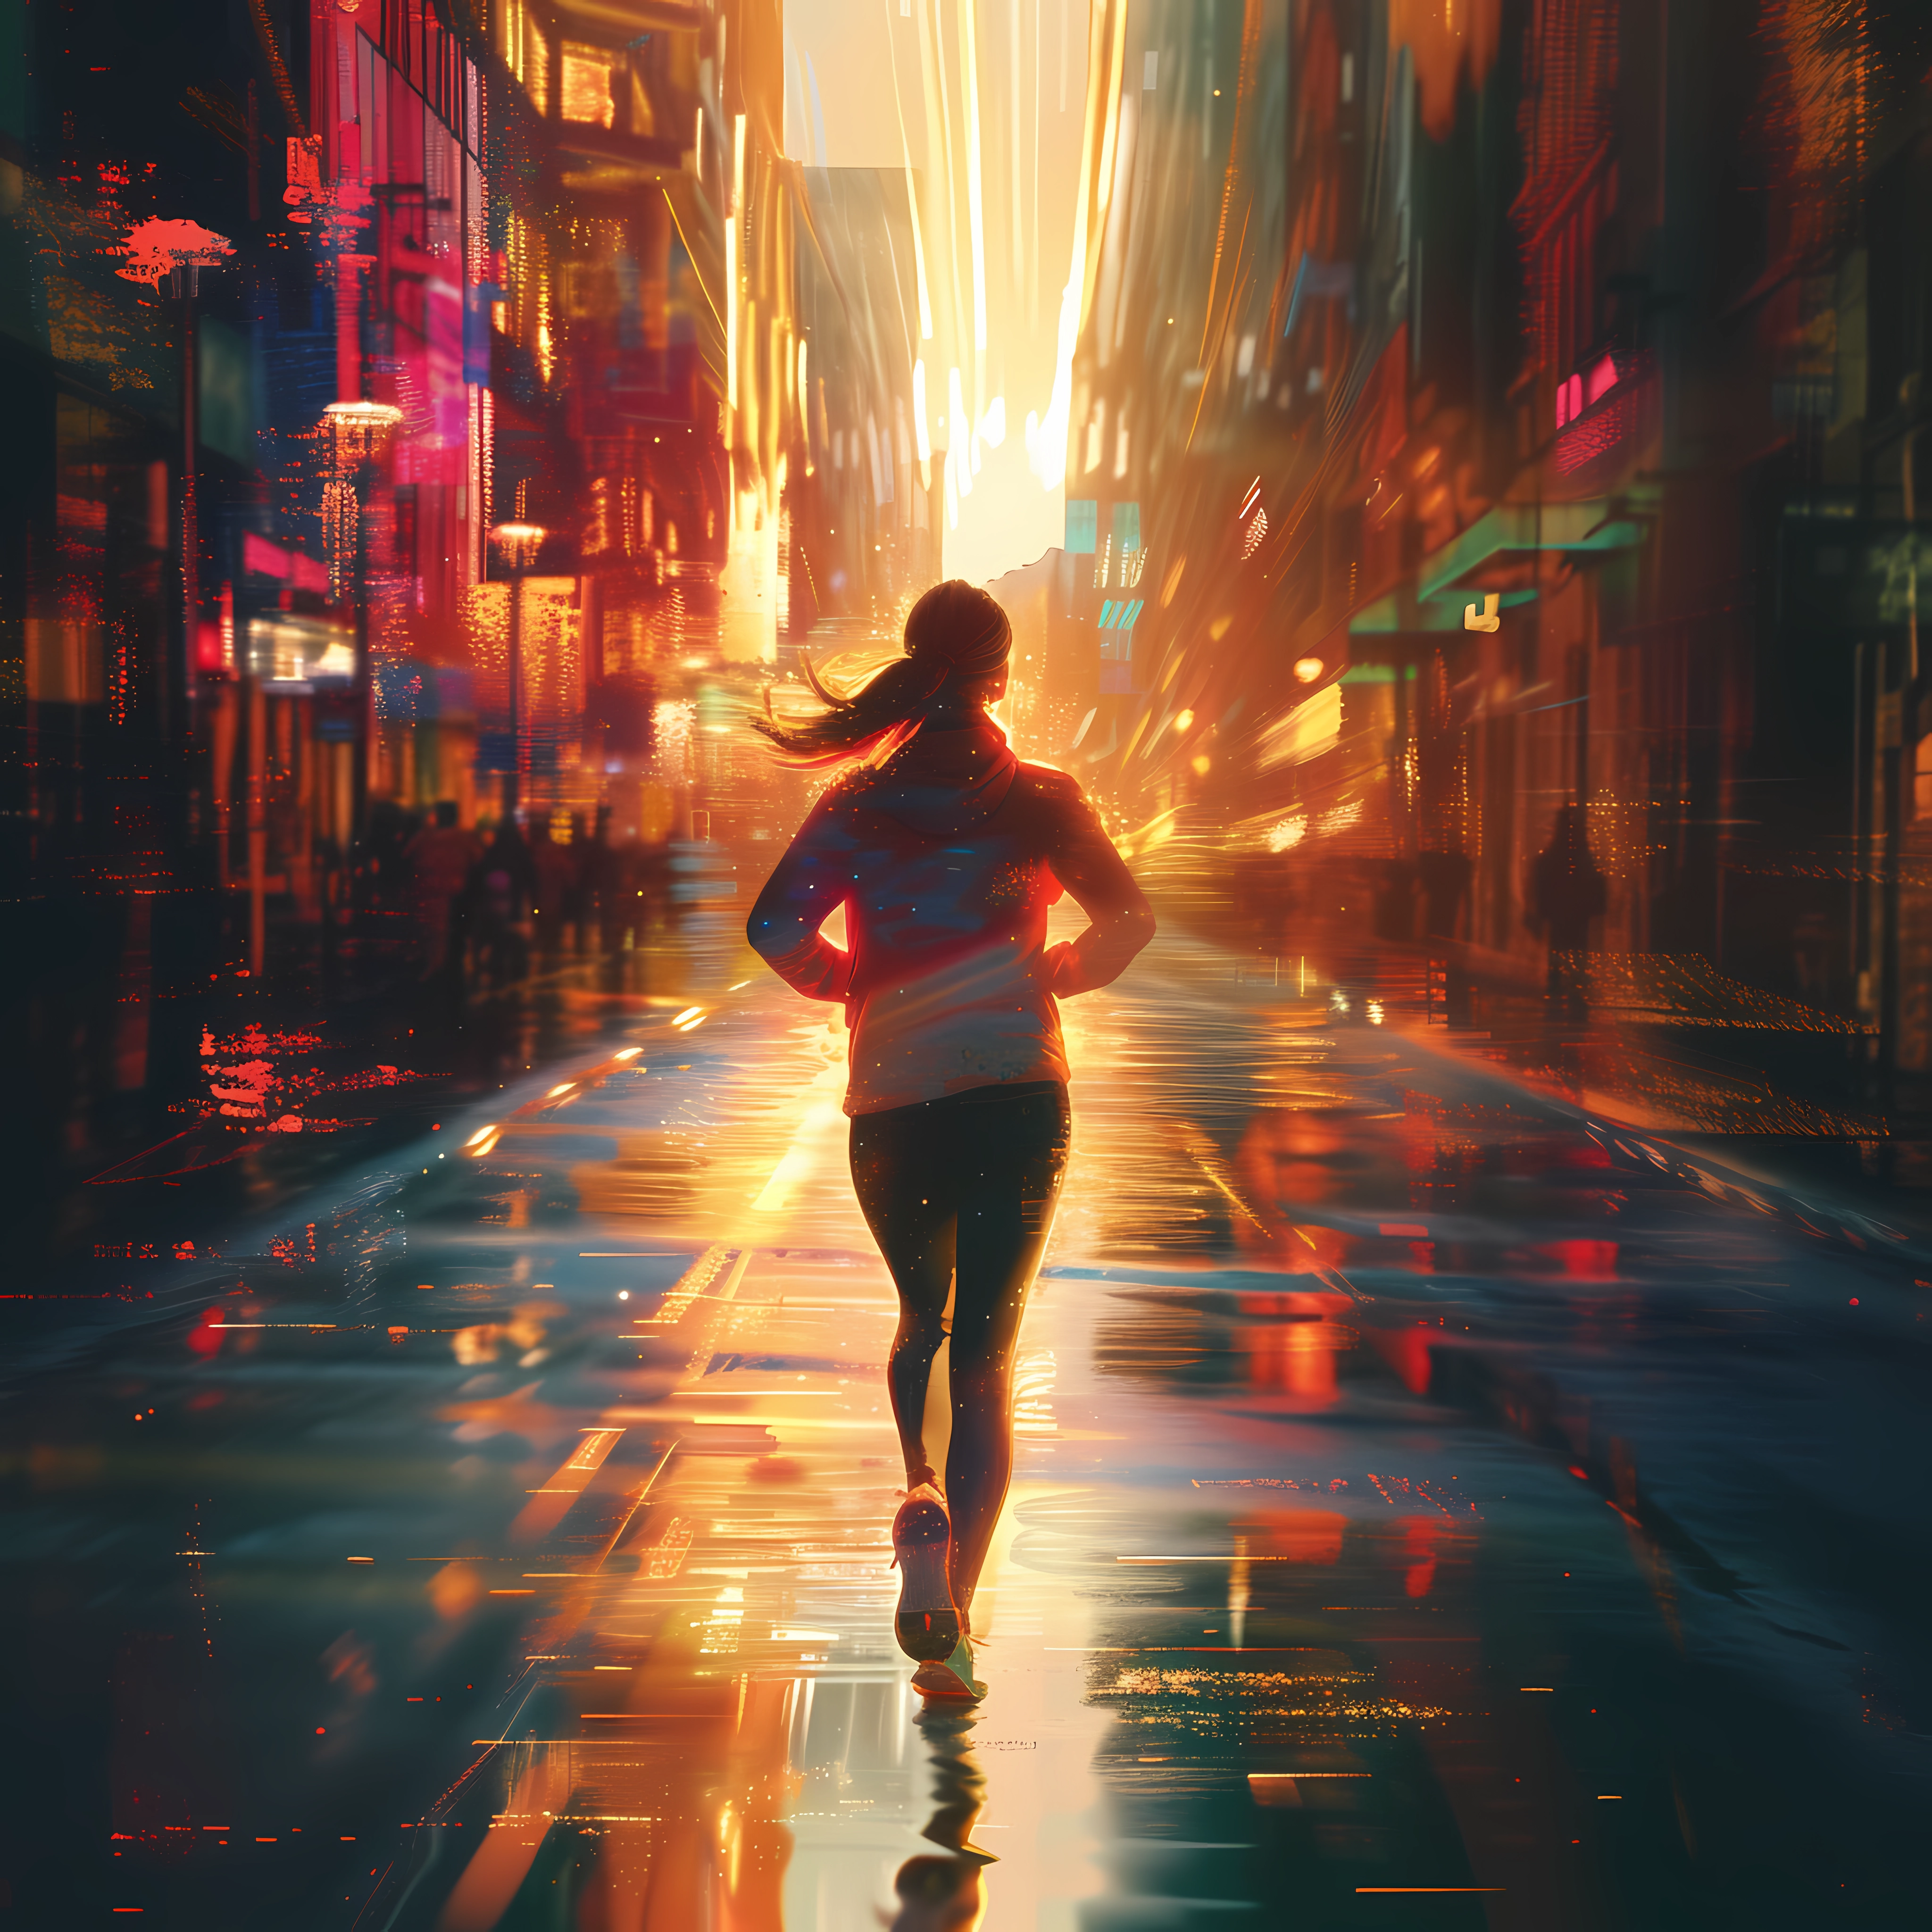 Illustration of a person jogging through a vibrant city street with dynamic lighting effects, suitable as a profile picture.